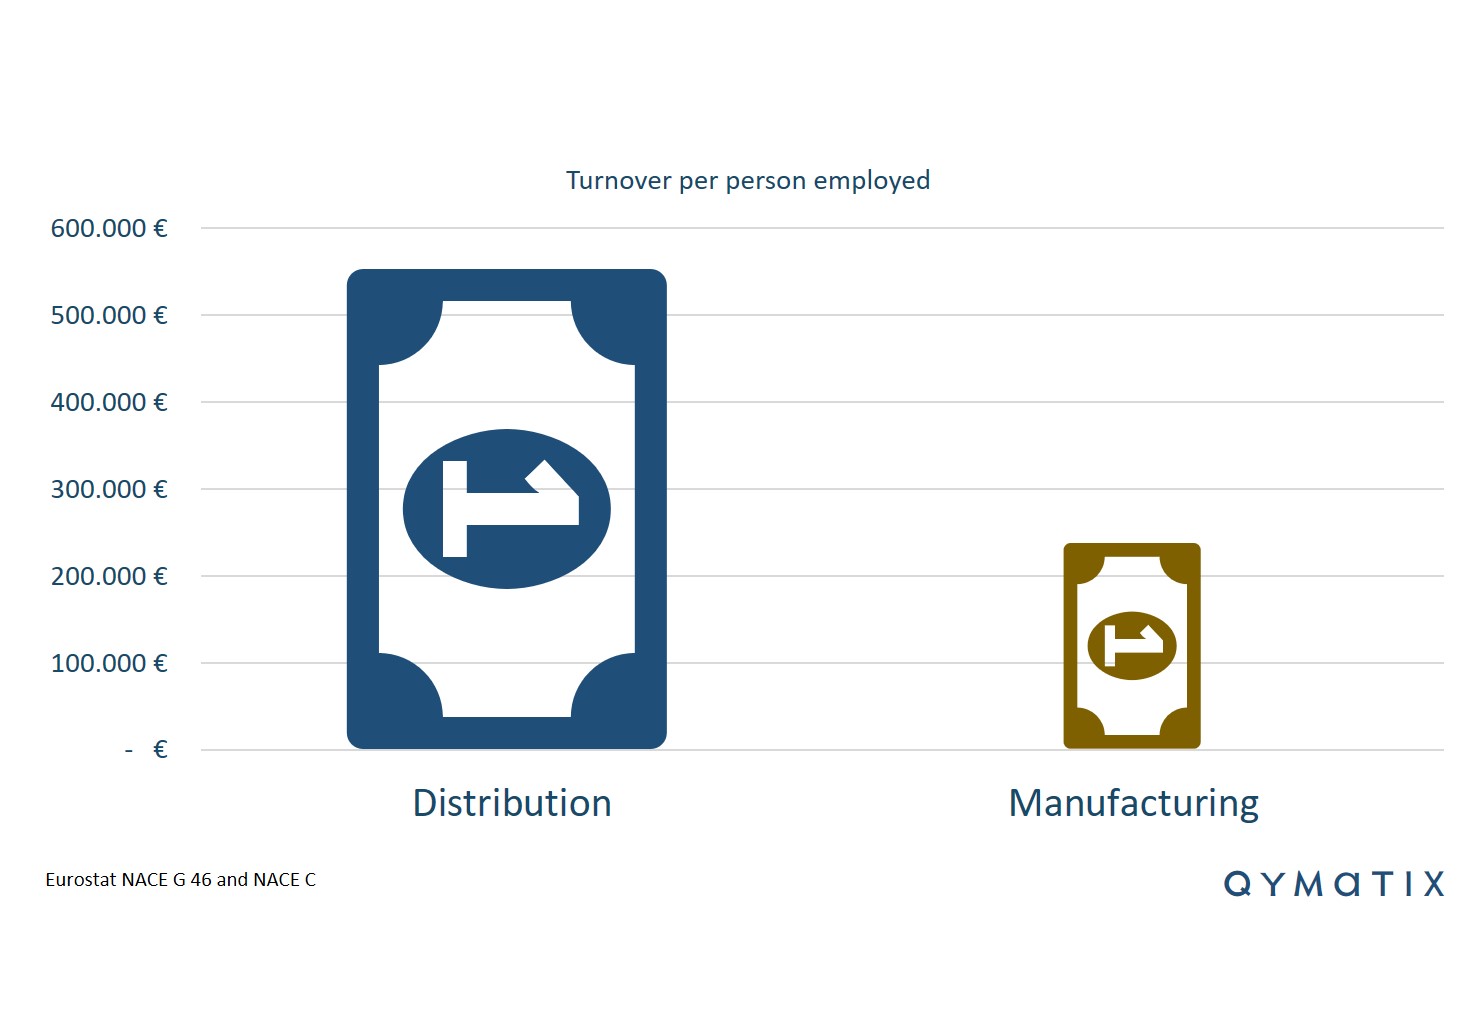 turnover-per-person-employed-distribution-manufacturing